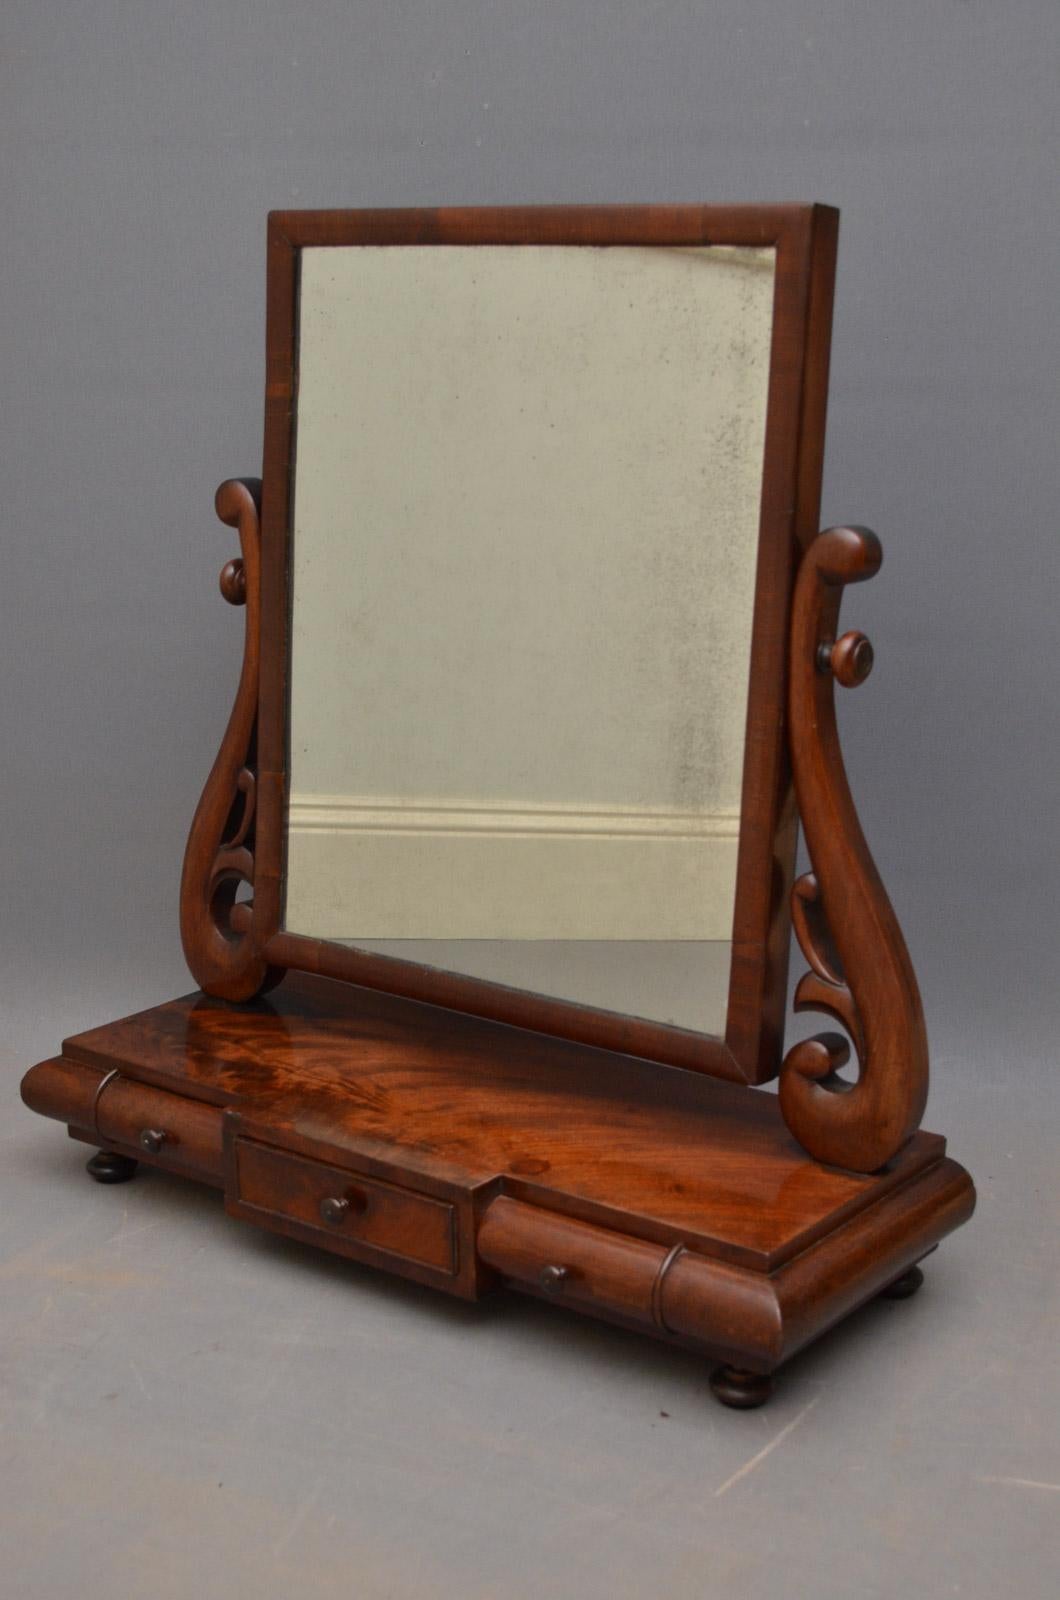 K093 Stylish William IV, mahogany dressing table mirror, having original mirror plate in rectangular frame with finely carved supports terminating in breakfronted, flamed mahogany base, cockbeaded centre drawer flanked by 2 cylindrical drawers all